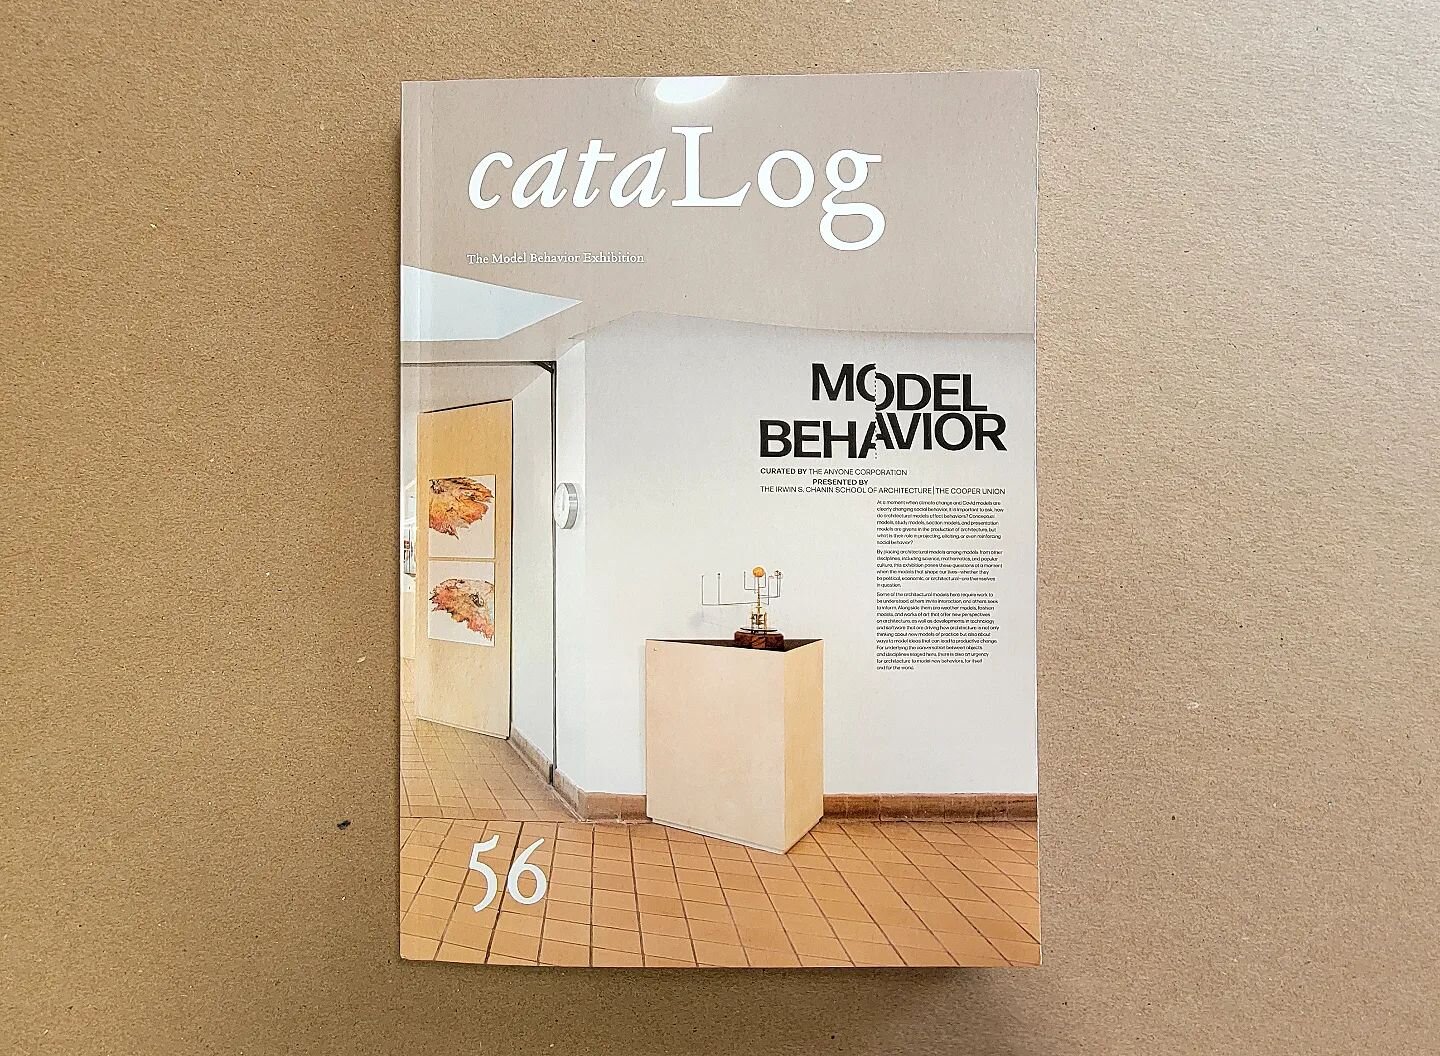 Log 56, the cataLog to the exhibition &quot;Model Behavior,&quot; is here! Five essays and 55 projects.

If you preordered of subscribe, your copy is on its way. Link in bio to subscribe and order.

#Log56 #Logmagazine #modelbehavior #architecturepub